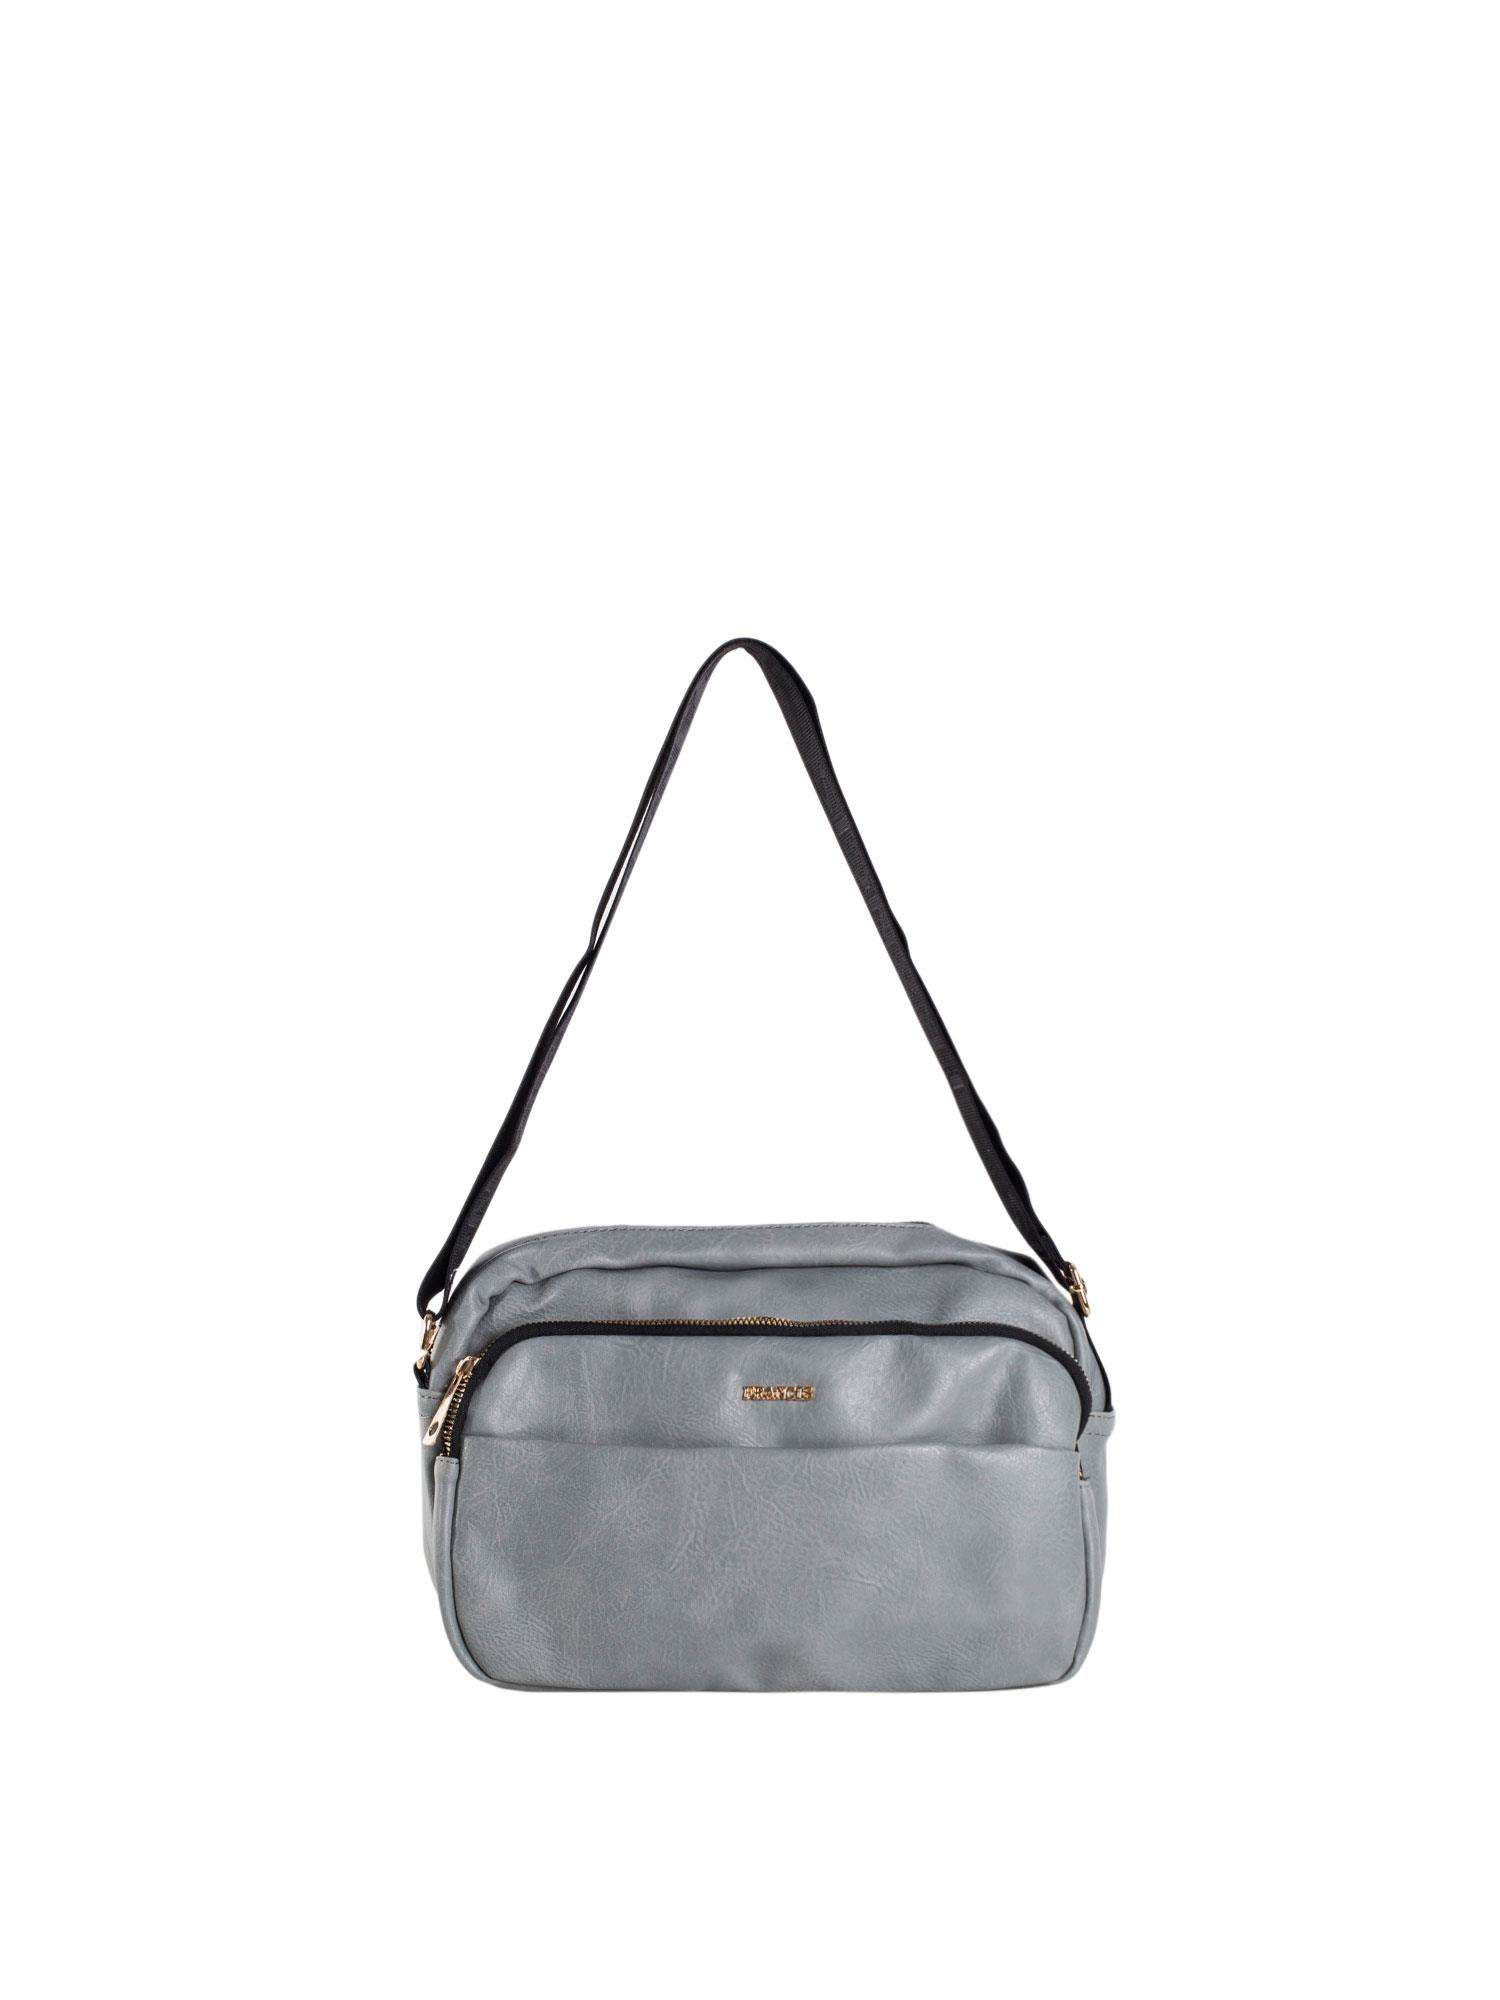 Grey women's messenger bag made of eco-leather